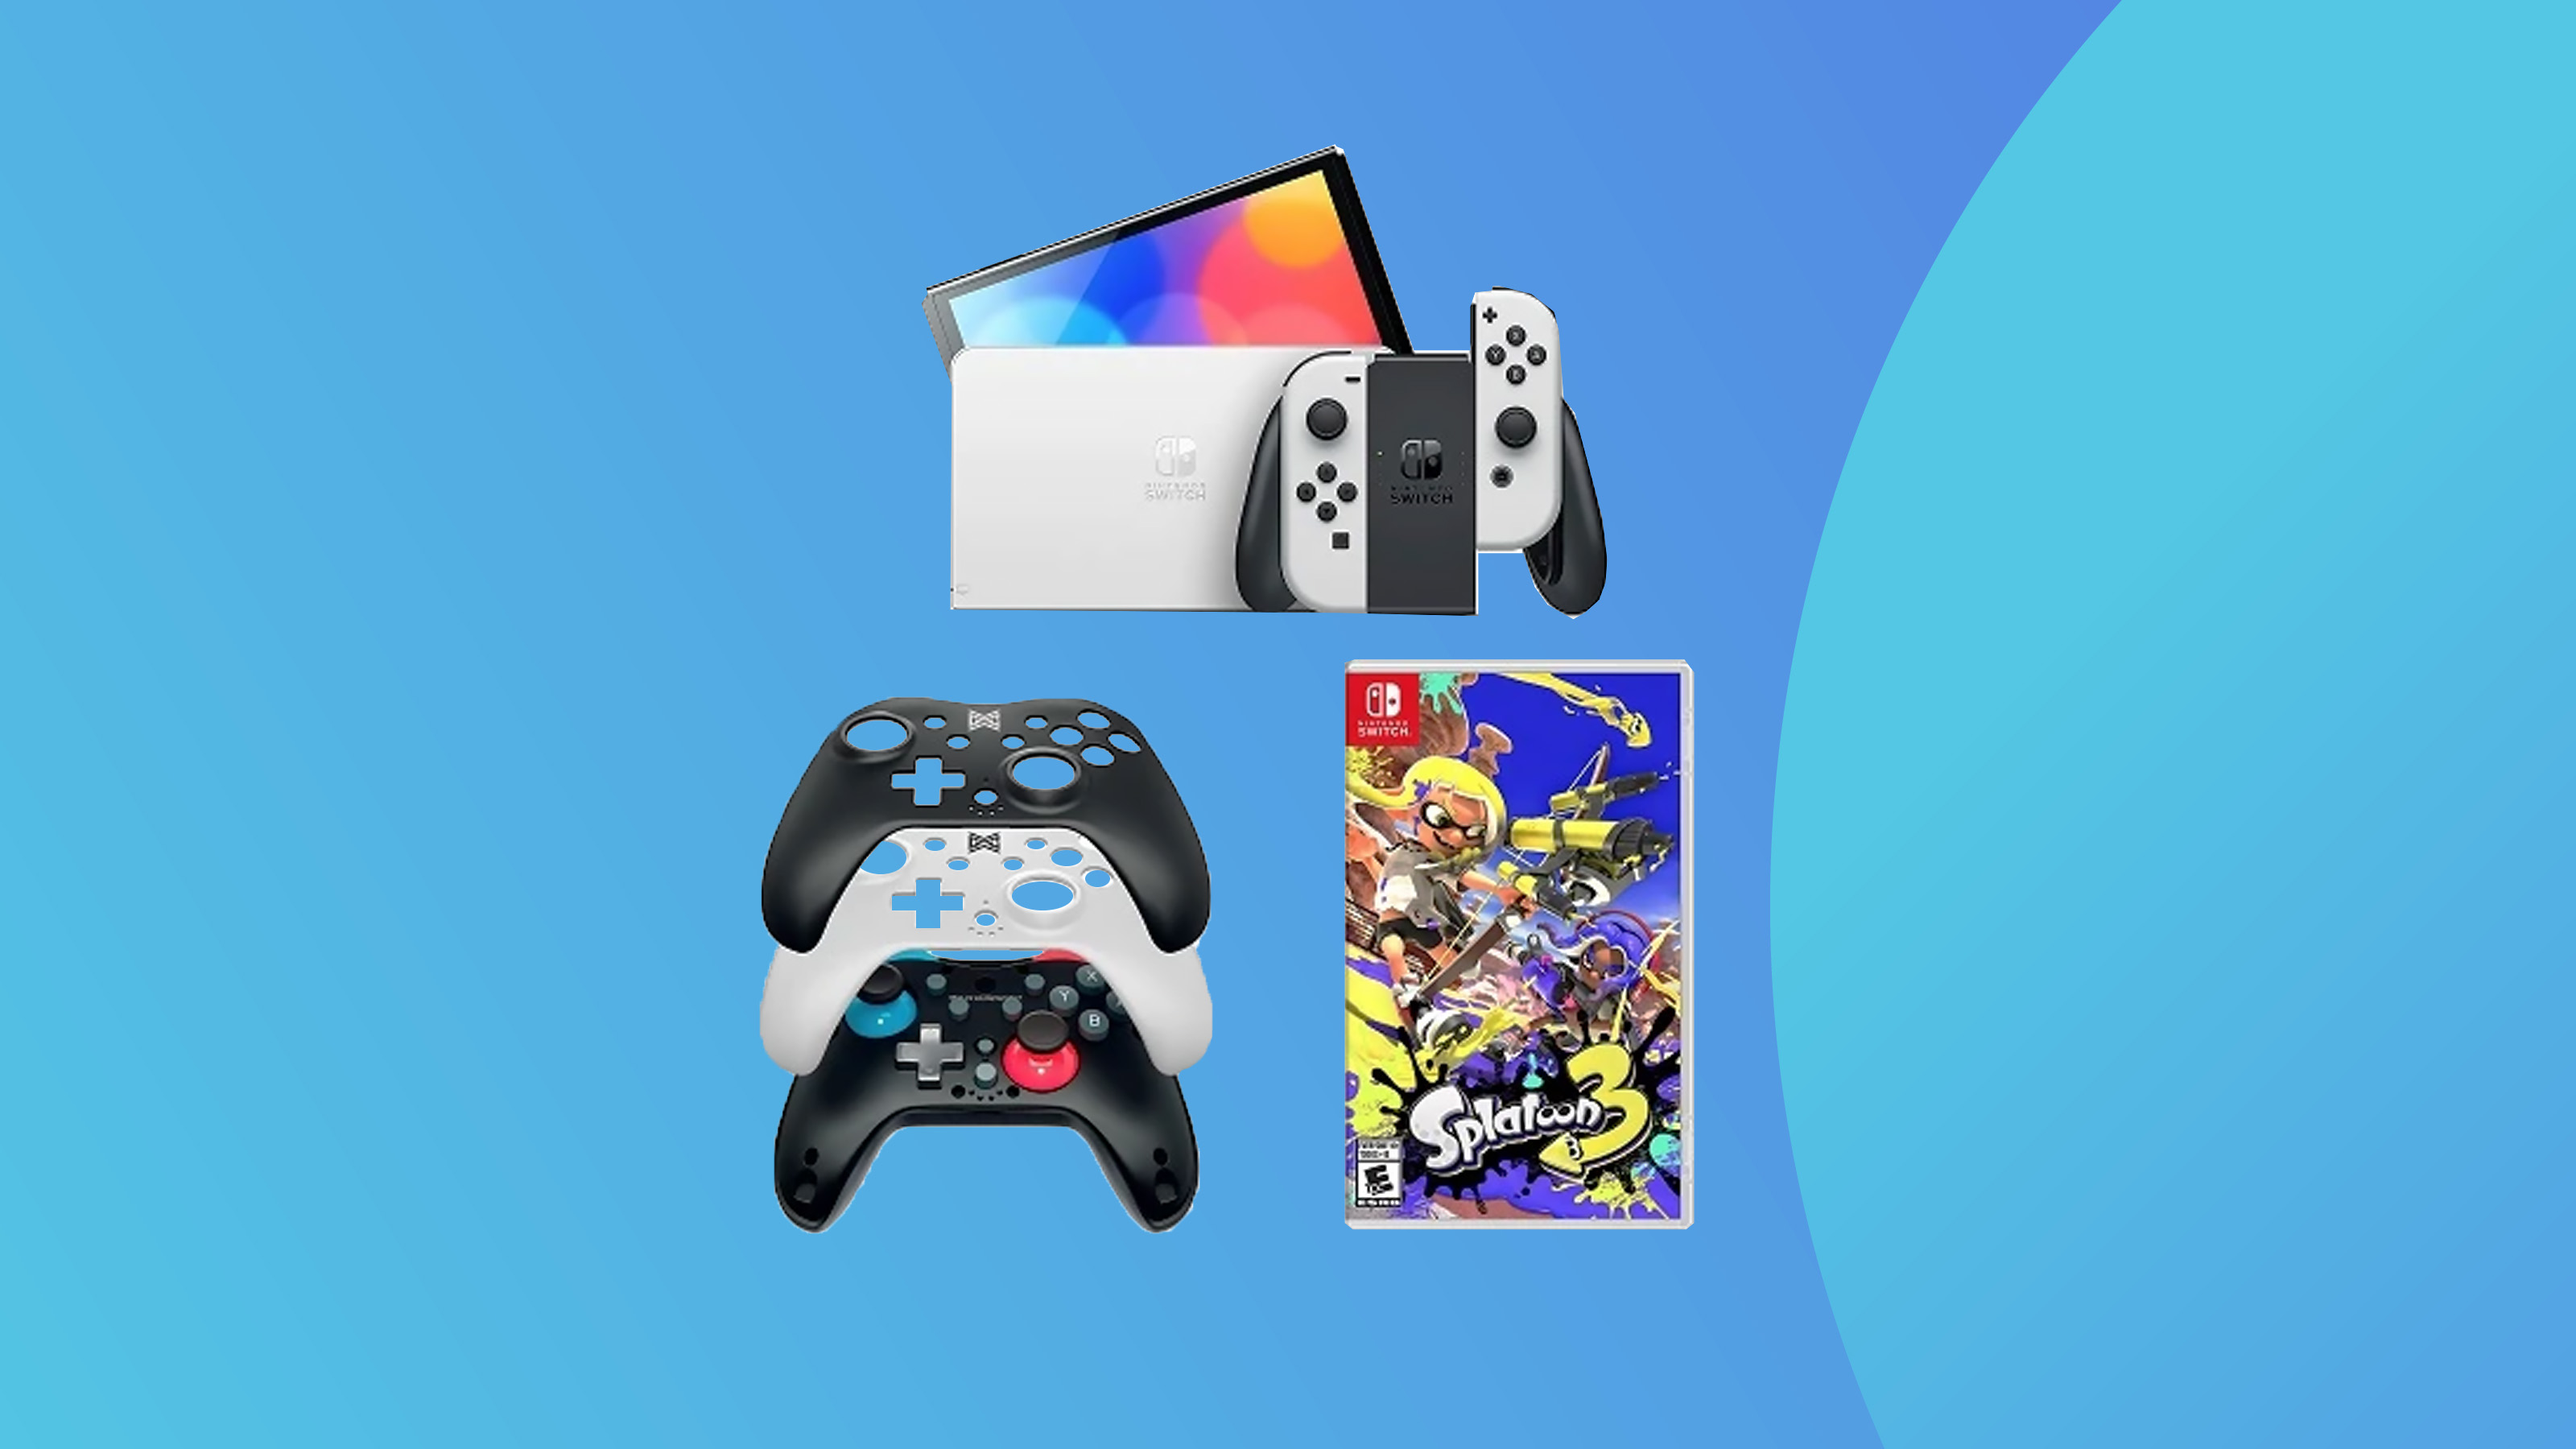 A product shot of Switch Oled and accessories on a colorful background